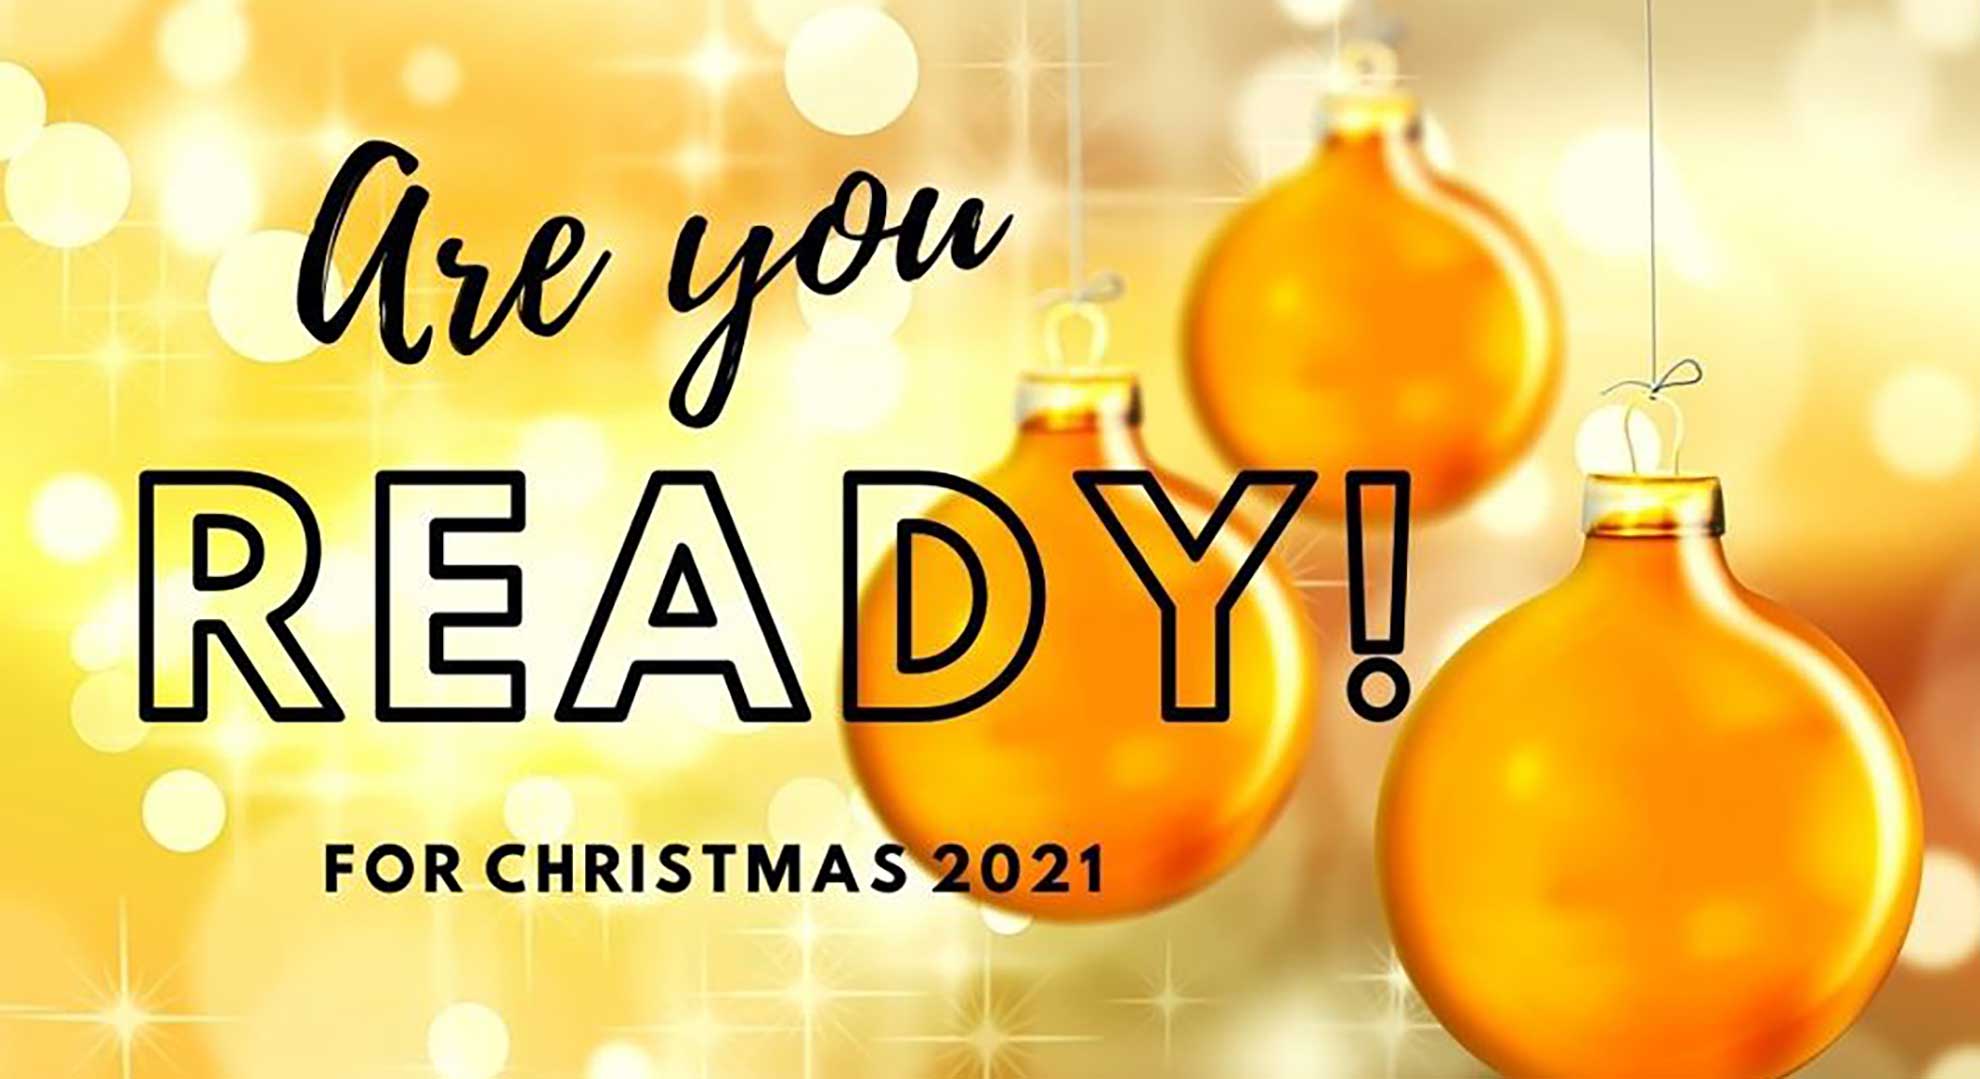 Are you ready for the logistics challenges of Christmas 2021?